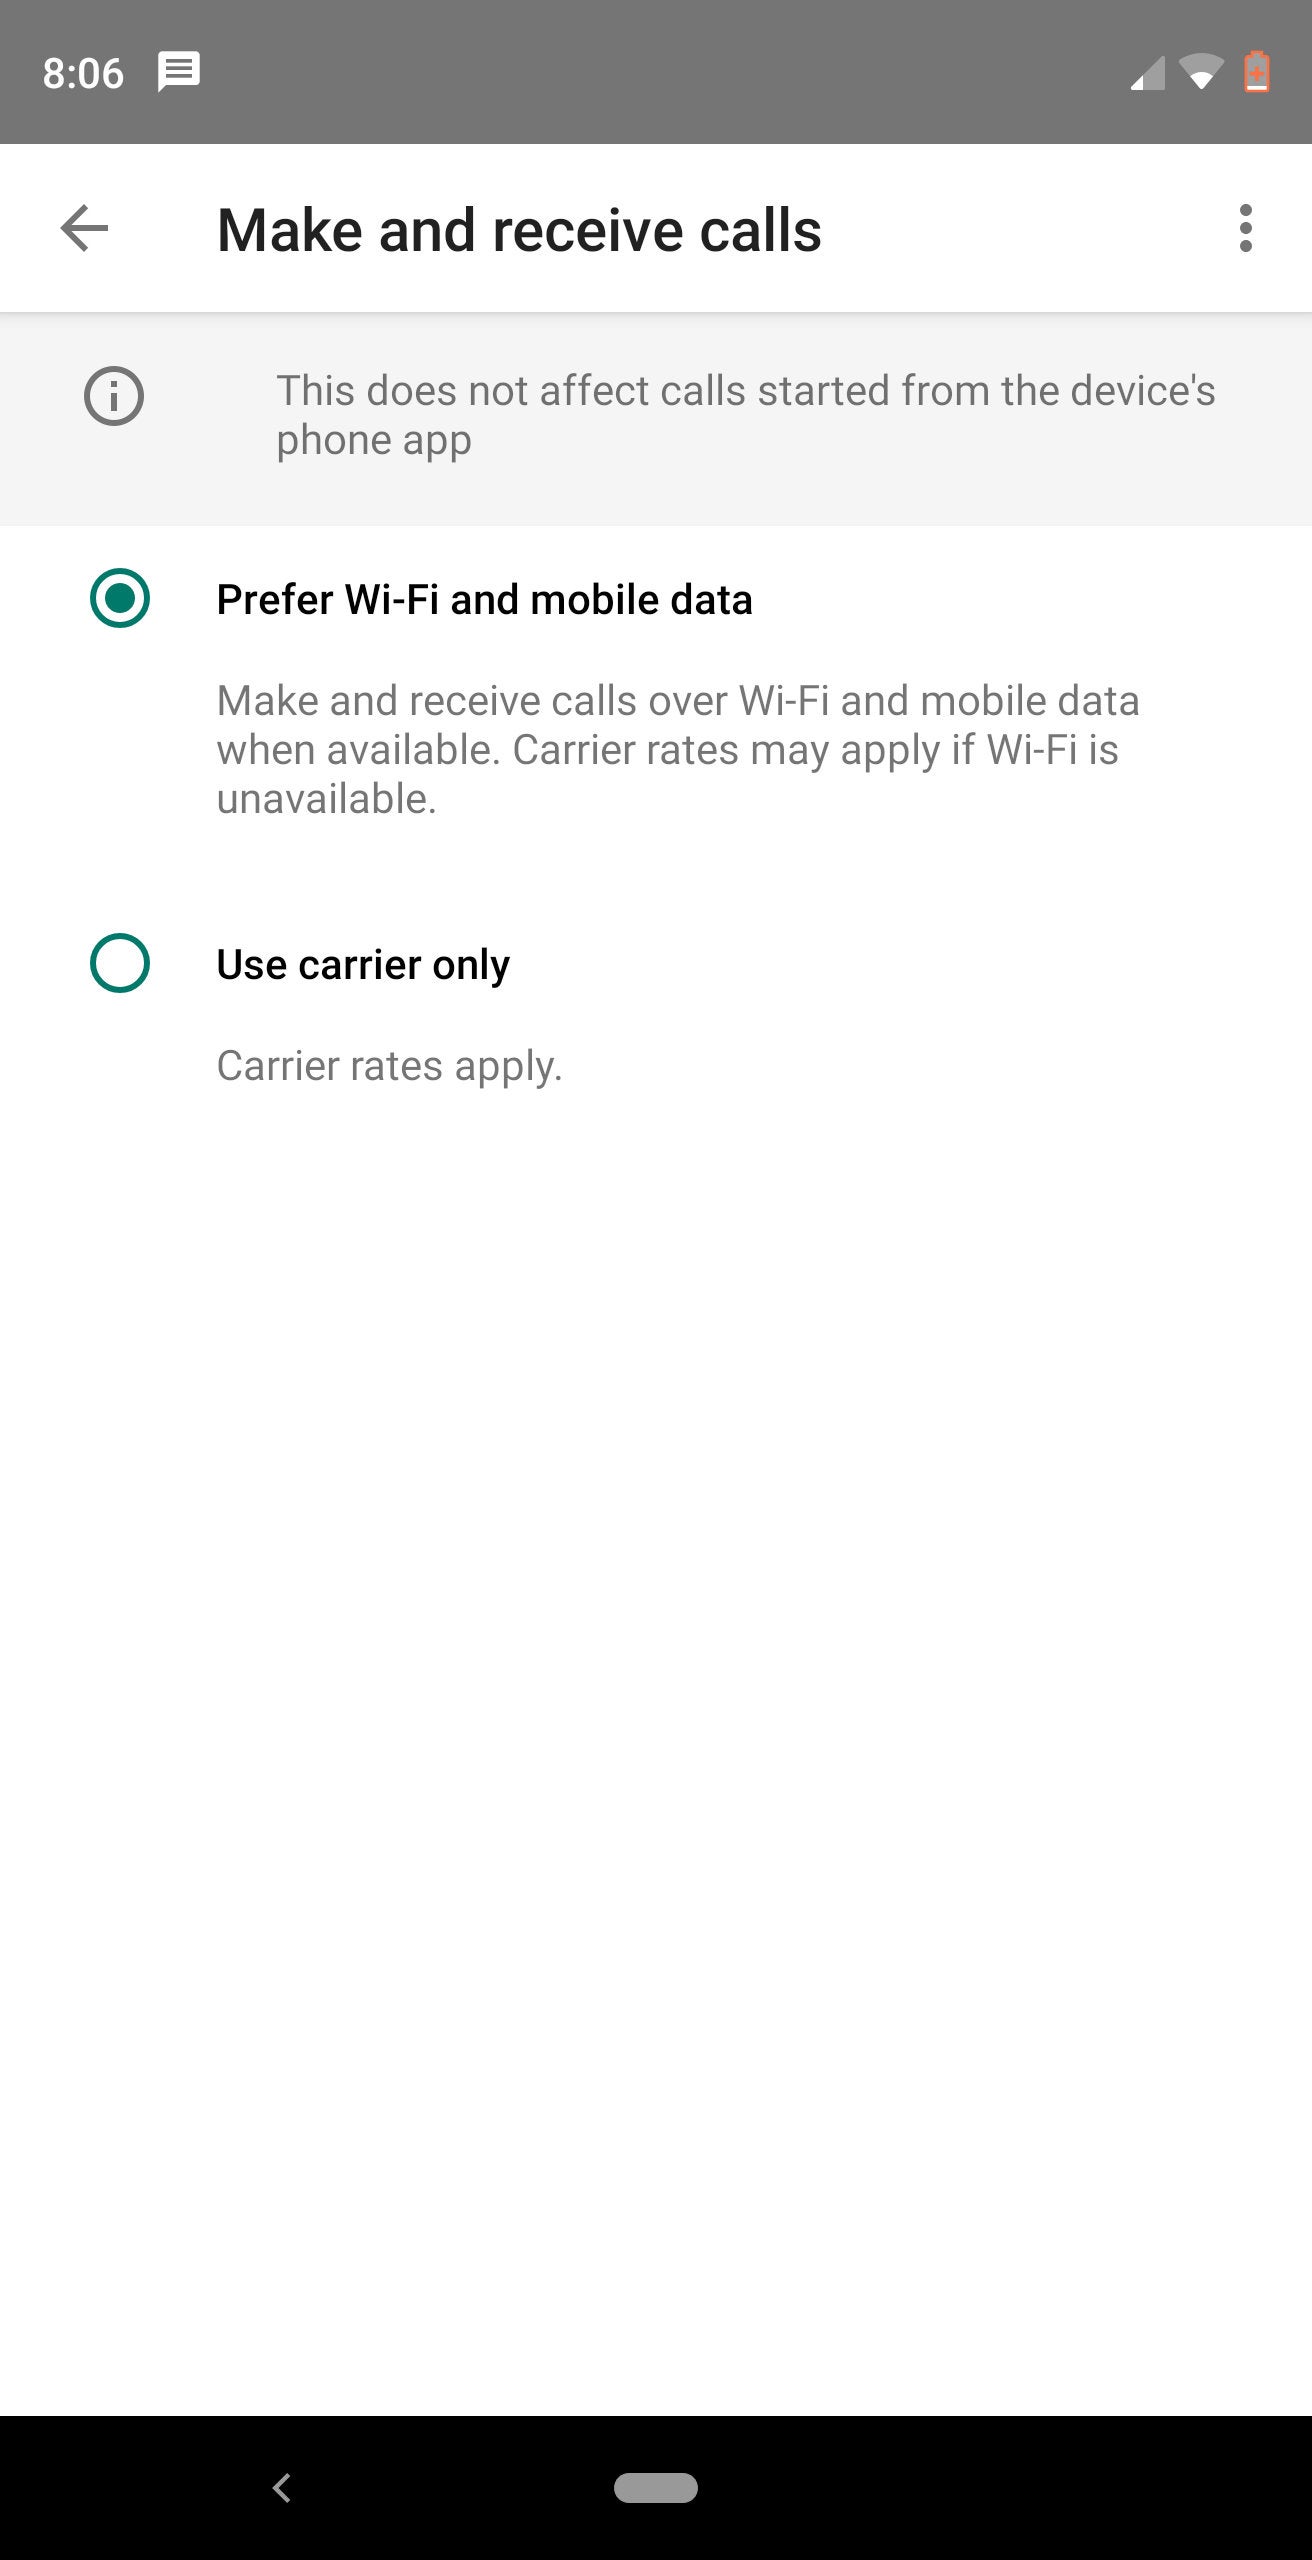 Google Voice update brings option to make and take calls over Wi-Fi